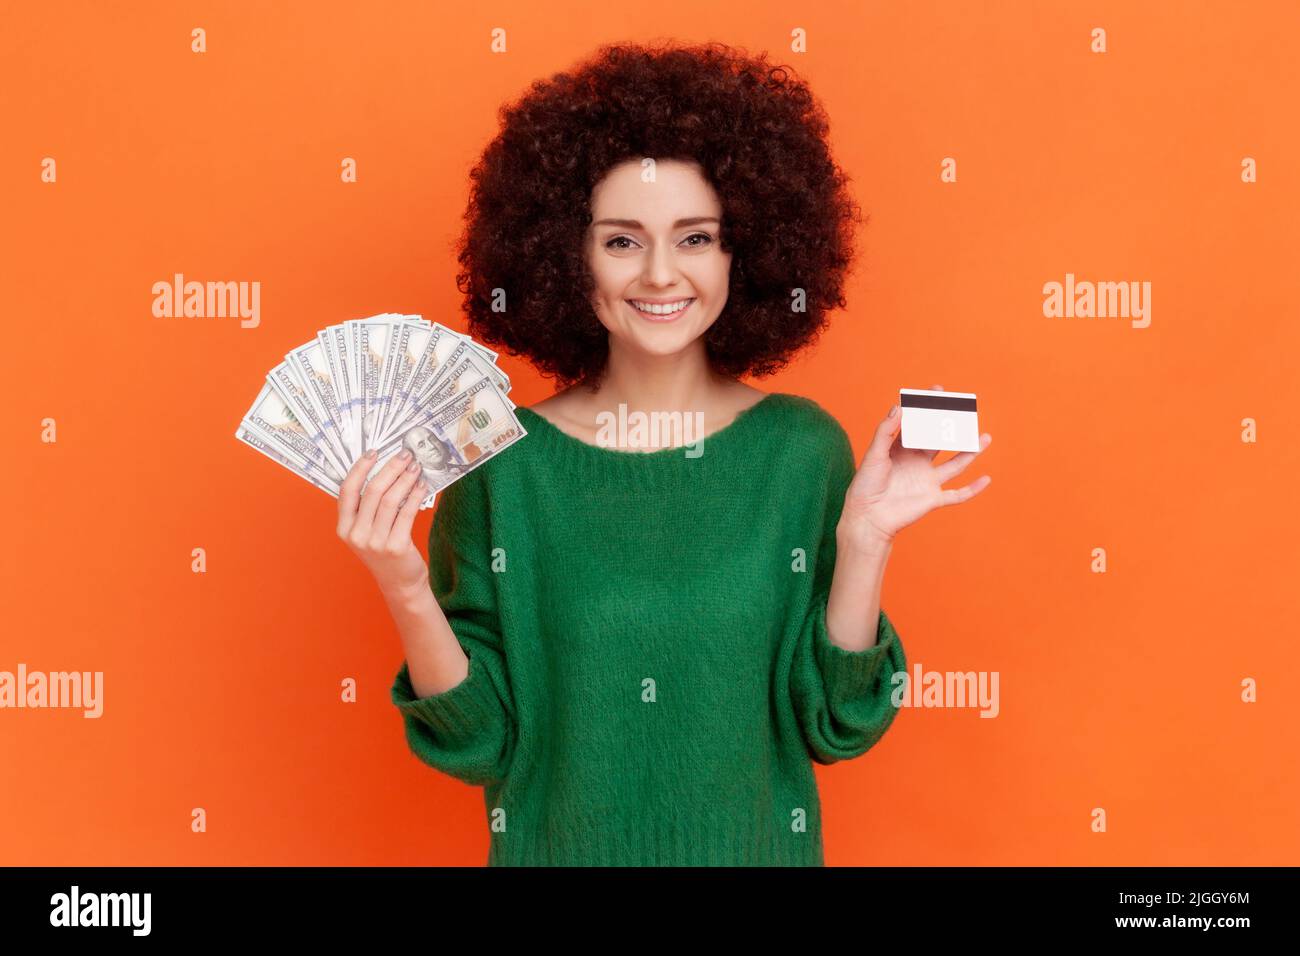 Satisfied woman with Afro hairstyle wearing green casual style sweater showing to camera dollar banknotes and credit card, investments. Indoor studio shot isolated on orange background. Stock Photo